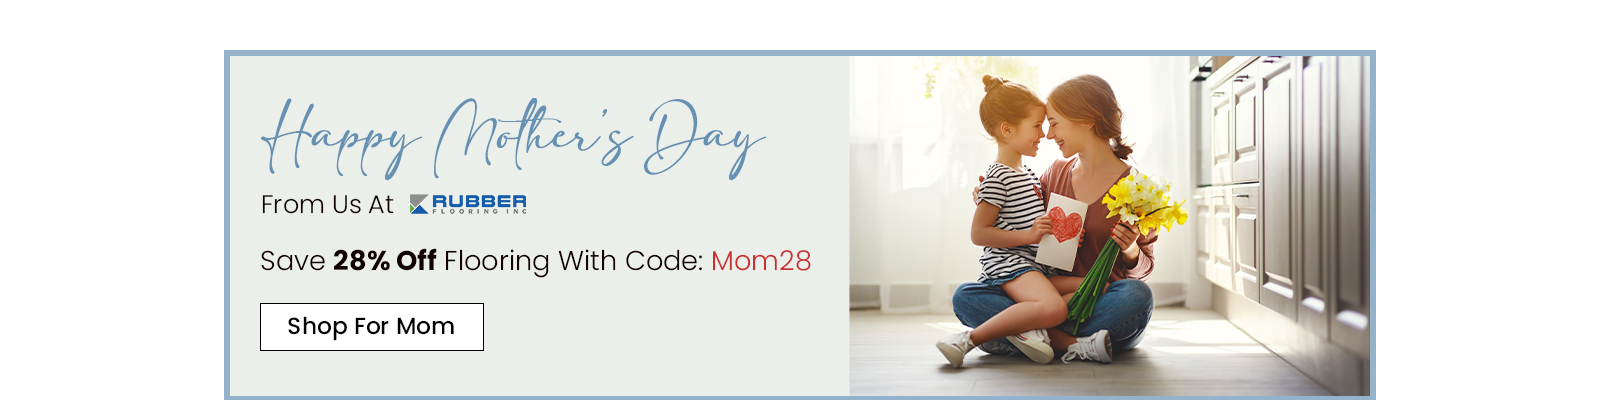 Home page banner image: rfi-mothers-day-hp.jpg